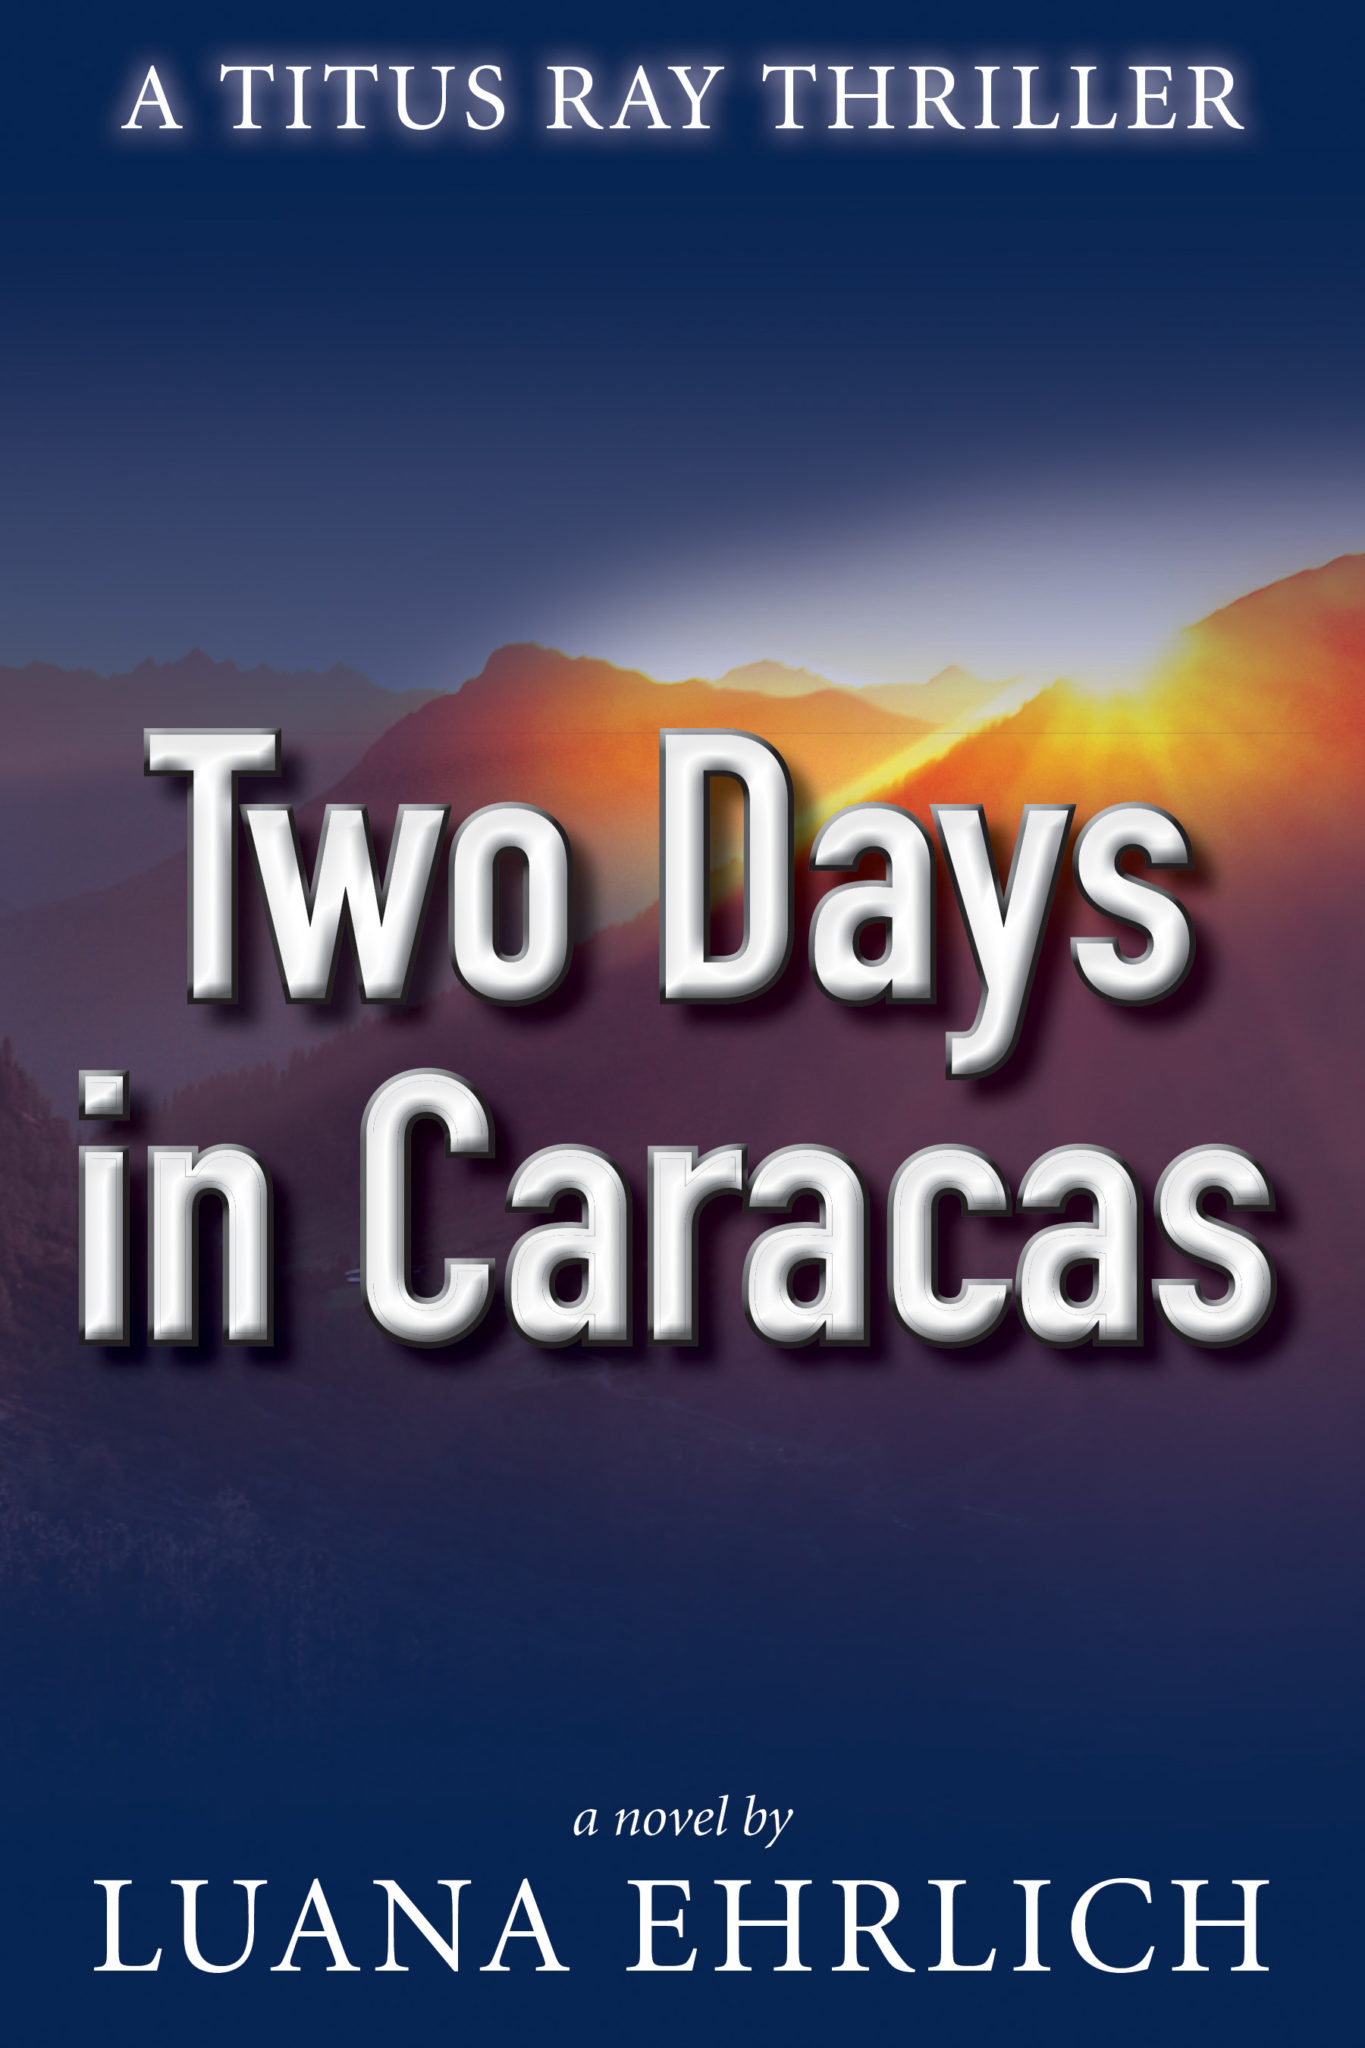 Two Days in Caracas: A Titus Ray Thriller by Luana Ehrlich